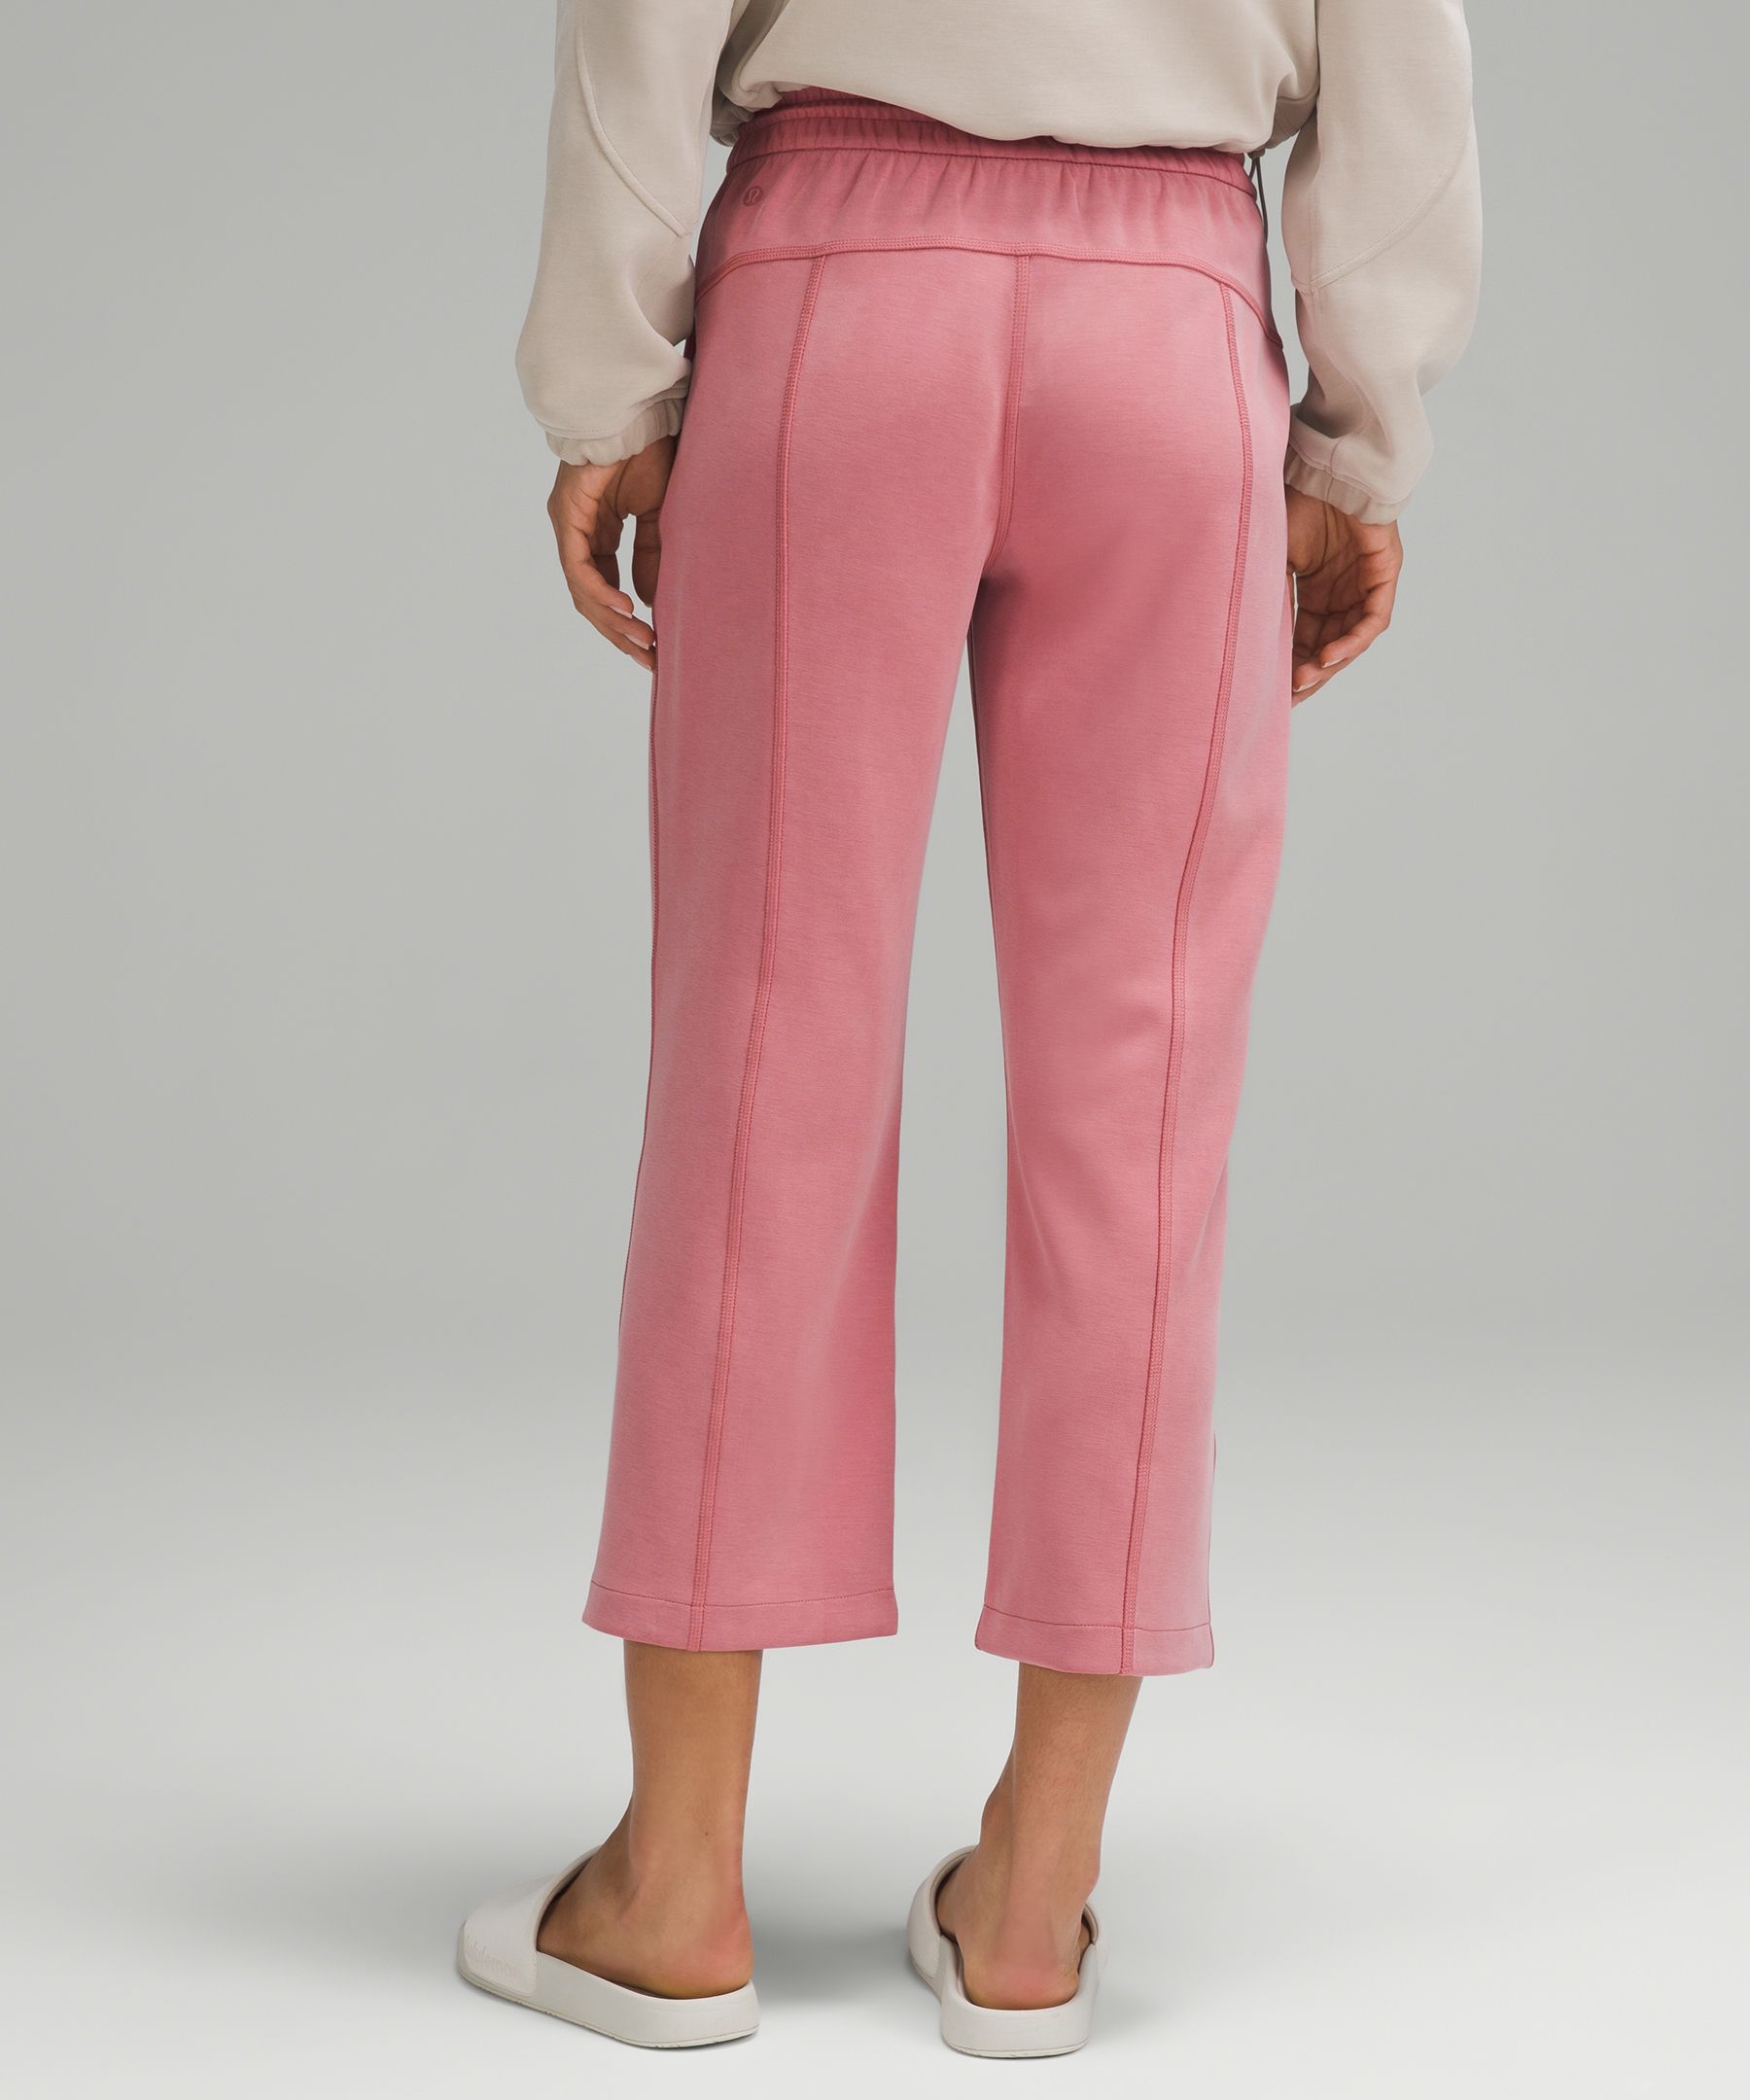 lululemon athletica Straight Cropped Pants for Women